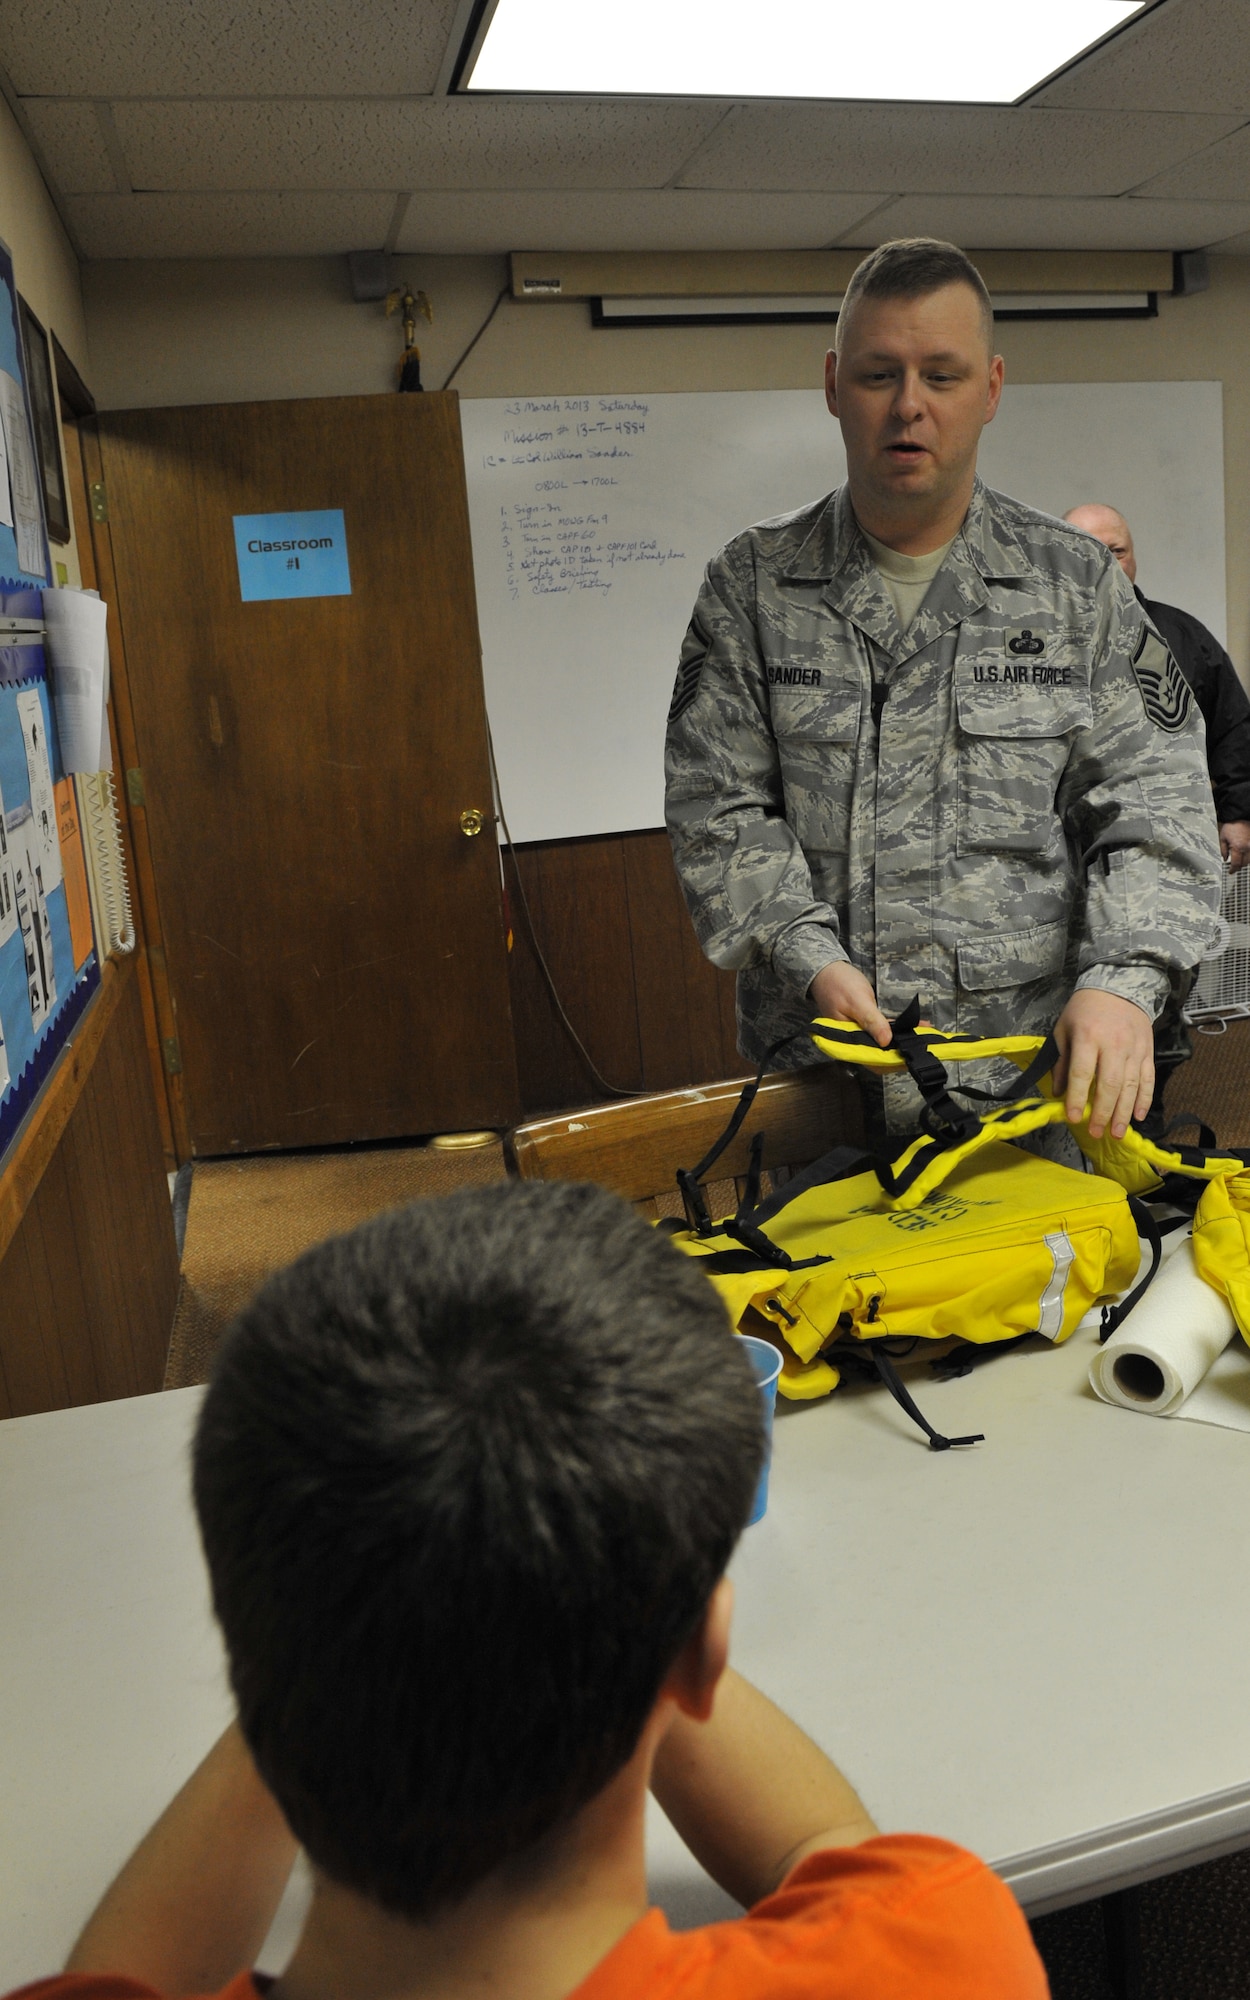 Master Sgt. William Sander, 509th Comptroller Squadron financial services superintendent, explains to a cadet how to assemble search and rescue field gear during a Civil Air Patrol meeting, March 28, 2013, in Sedalia, Mo. Cadets are taught how to use equipment for emergency services missions. (U.S. Air Force photo by Heidi Hunt/Released)